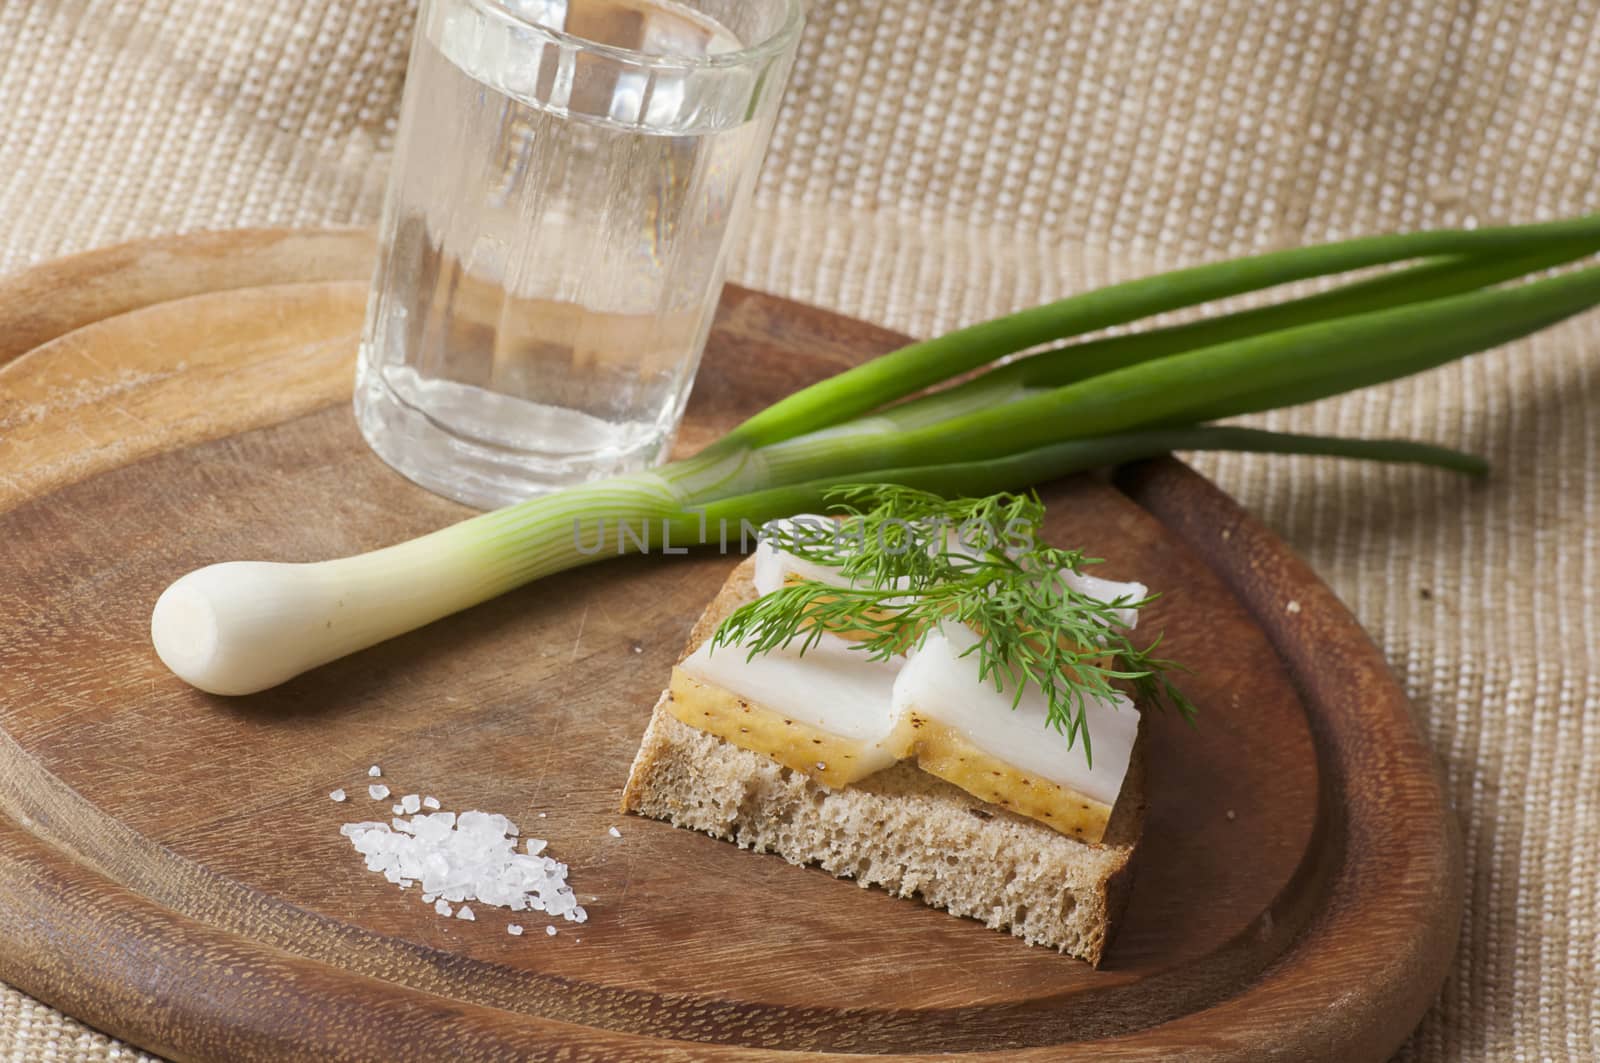 Sandwich with salted lard on rye bread served with vodka, green onion